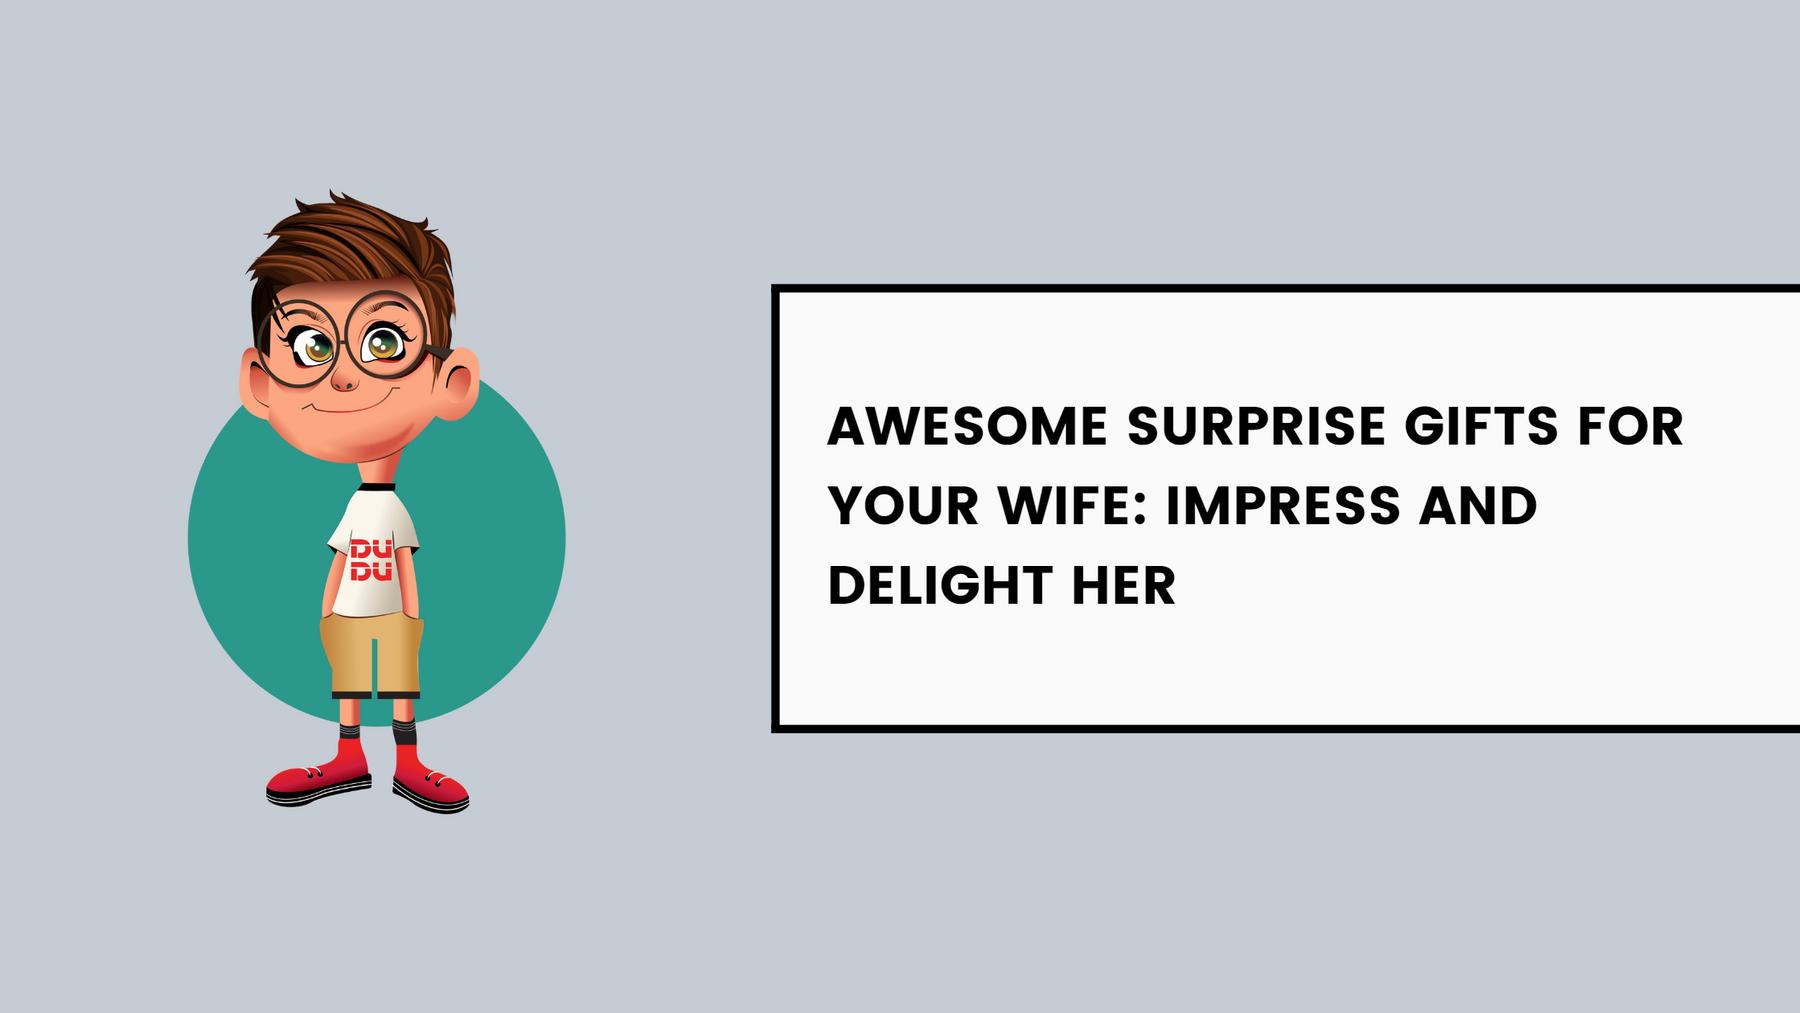 Awesome Surprise Gifts For Your Wife: Impress And Delight Her